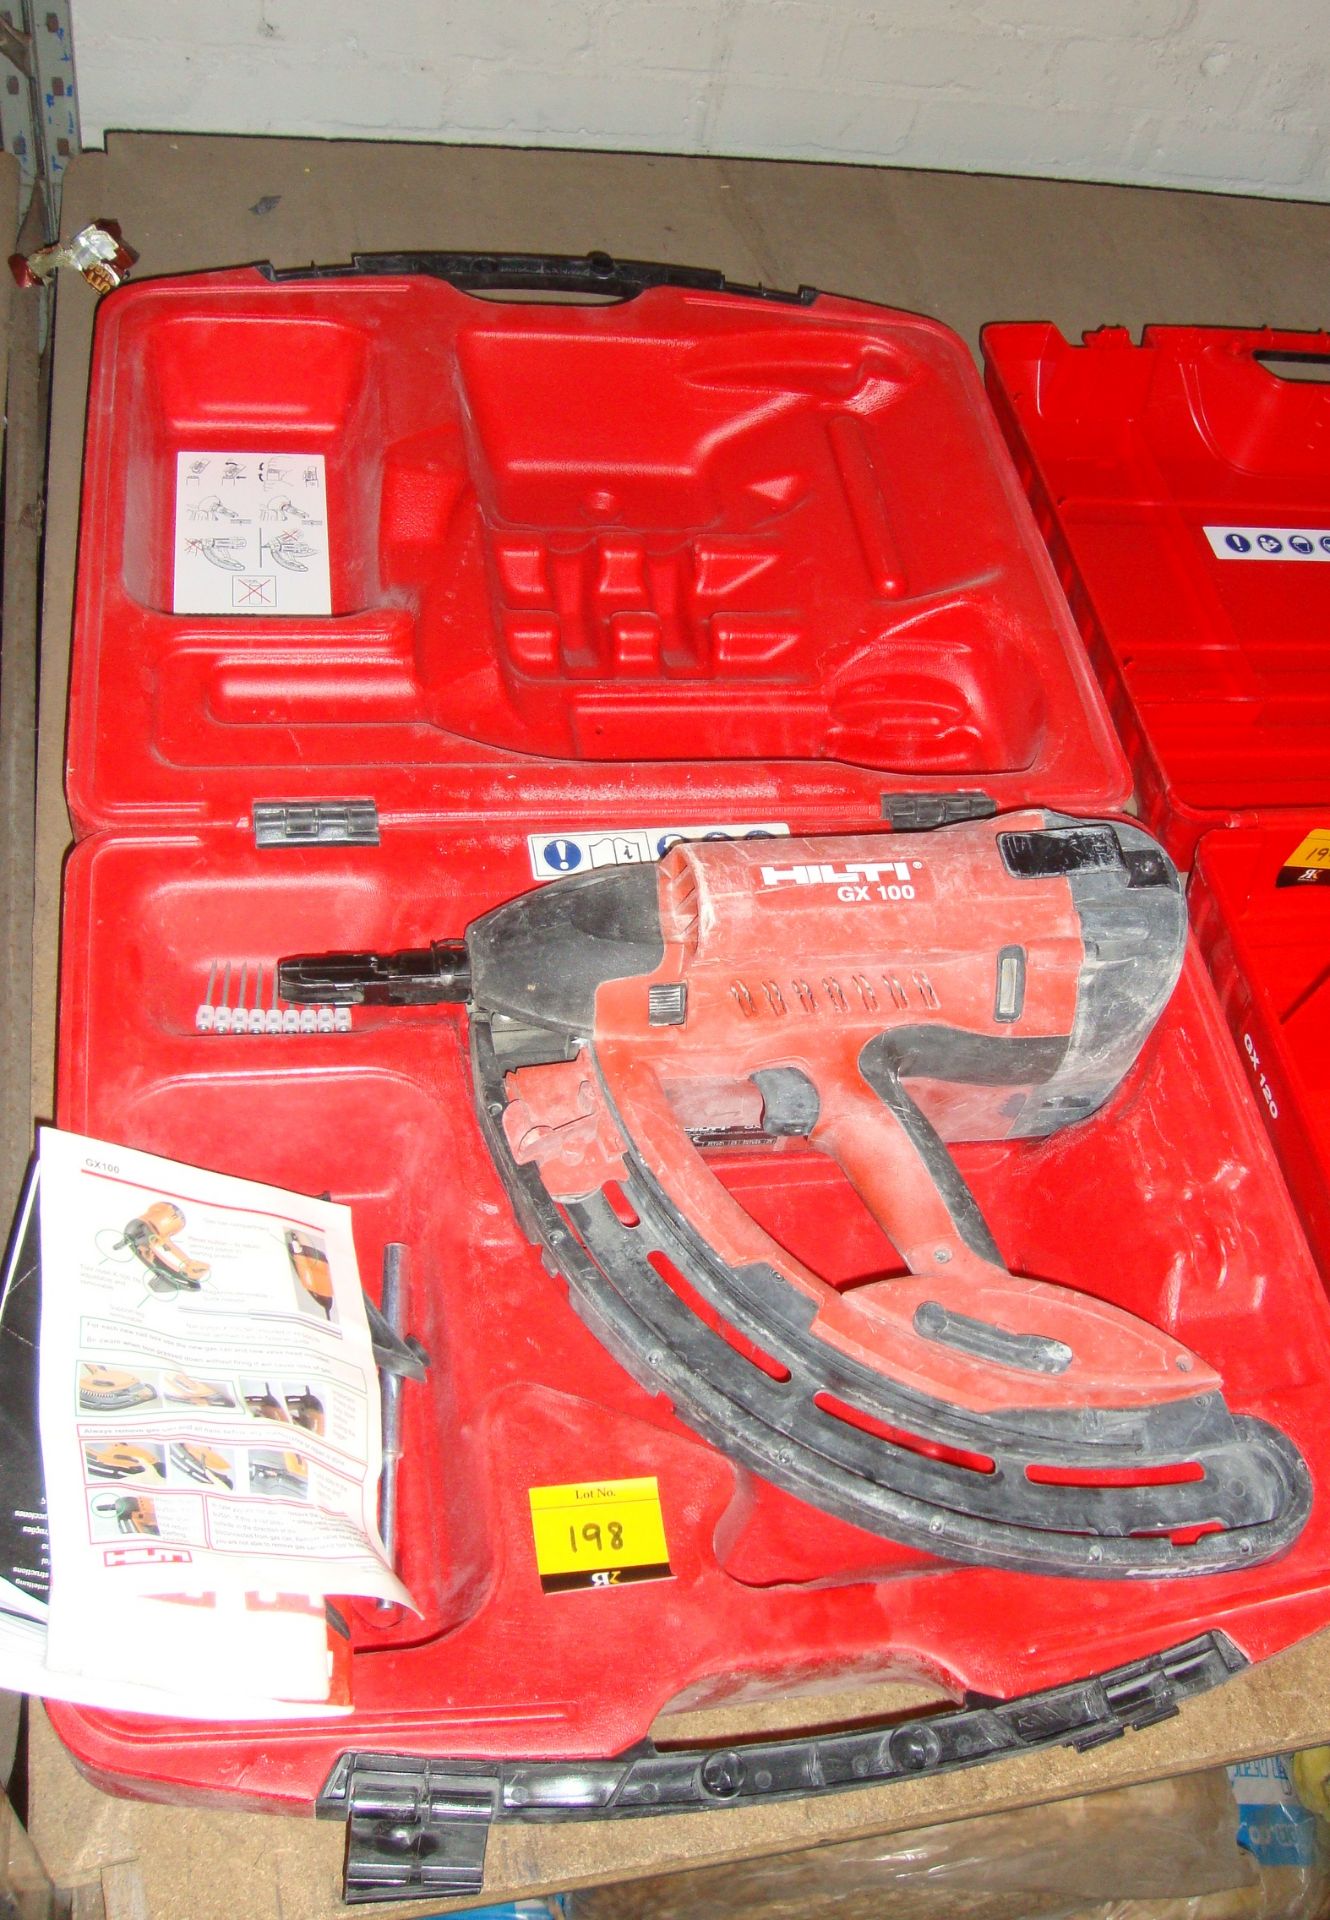 Hilti GX100 nail gun, including case, book pack and other minor ancillary items as pictured